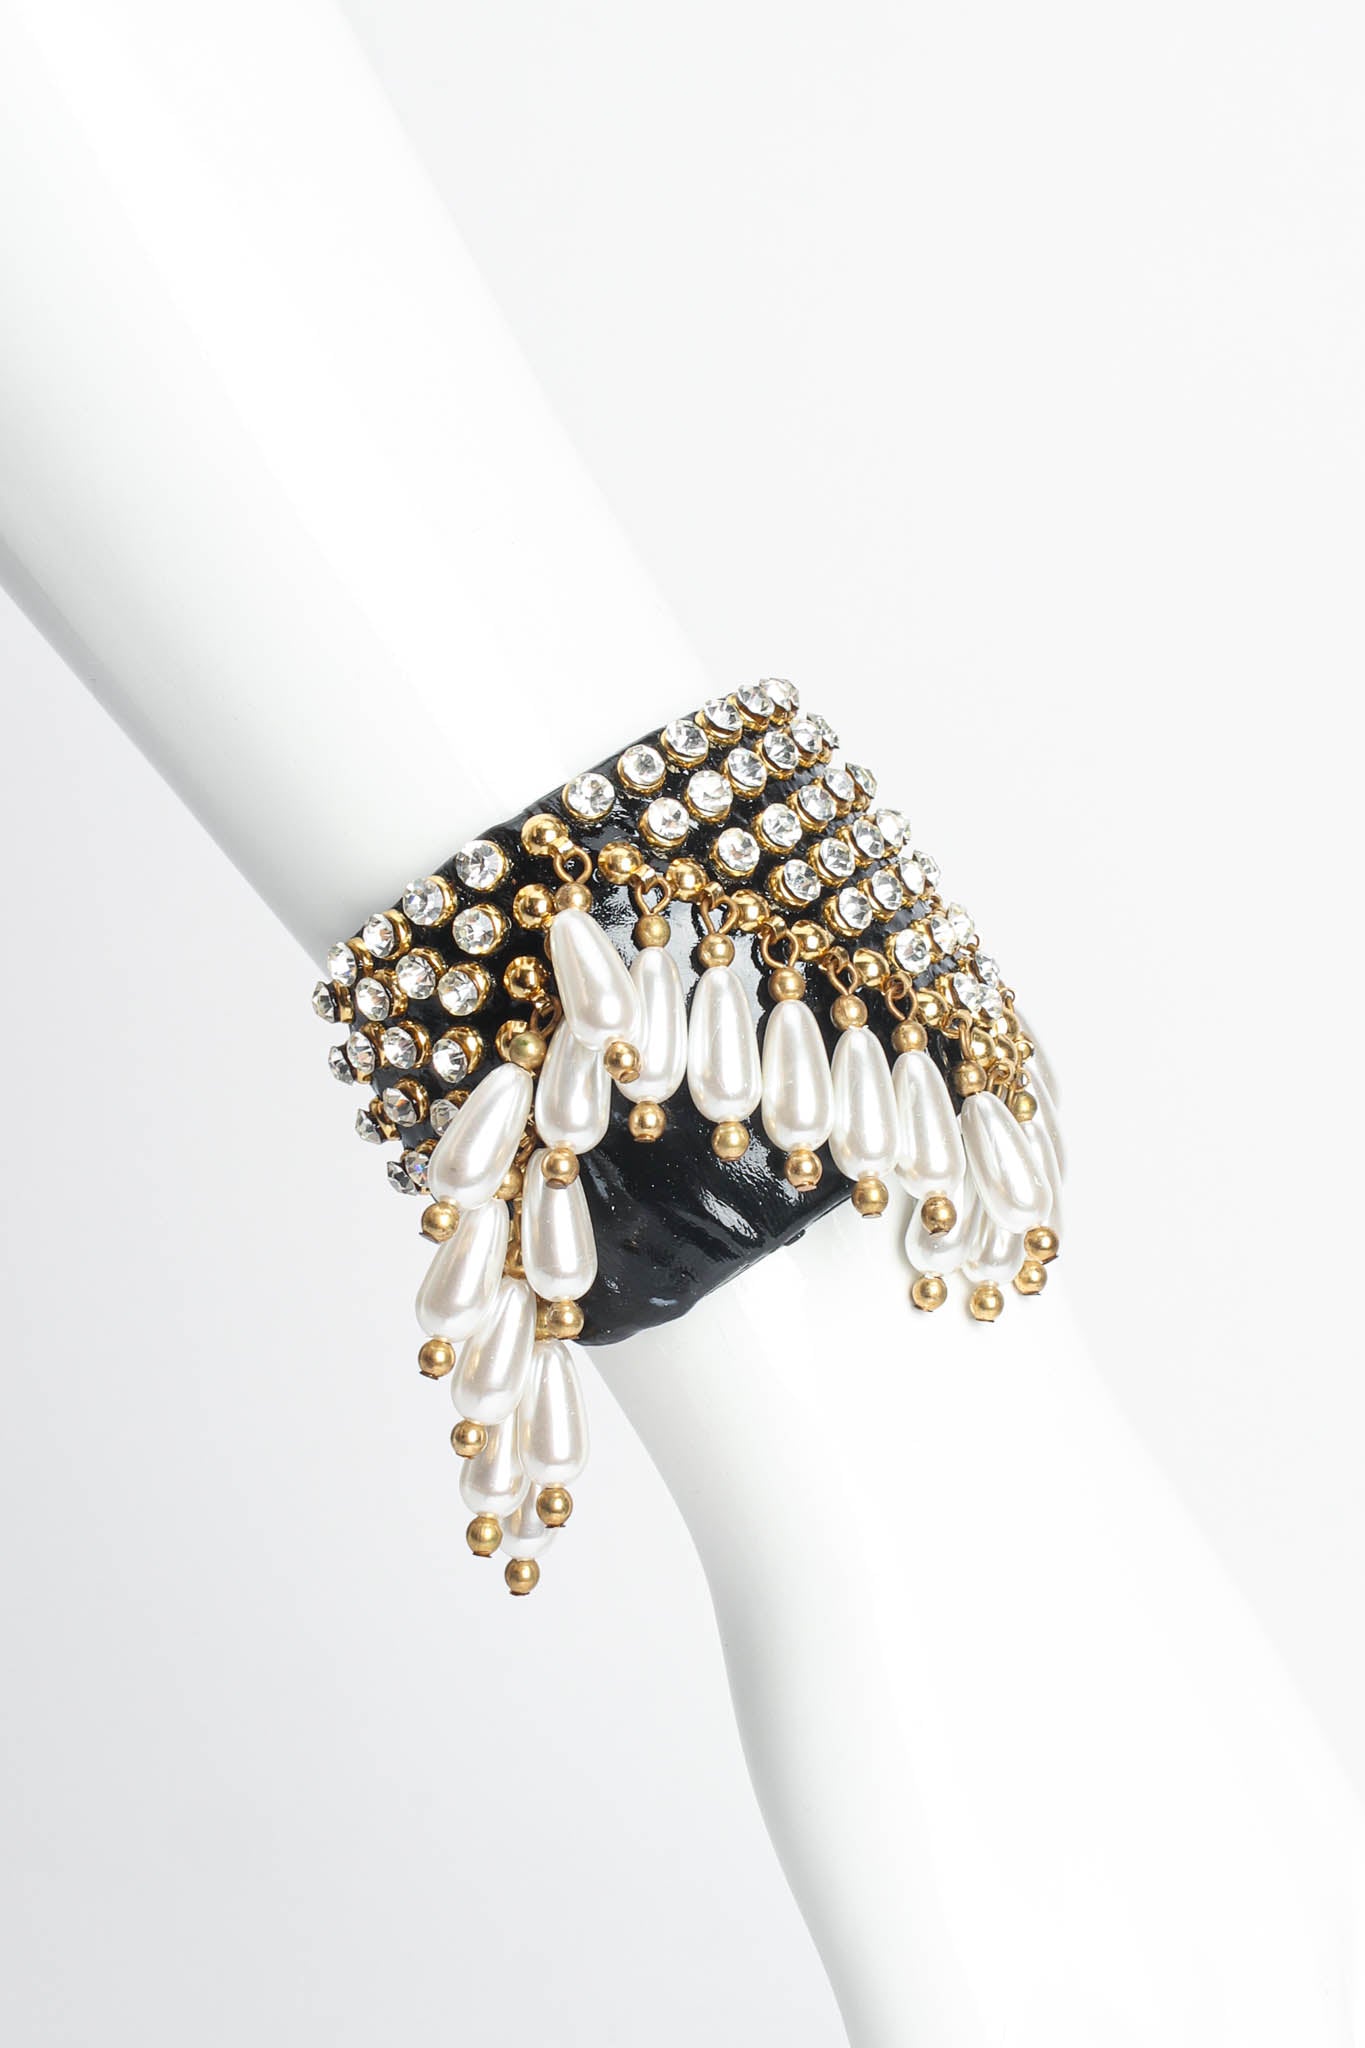 Vintage Patent Leather Rhinestone & Pearl Cuff on mannequin wrist @ Recess Los Angeles